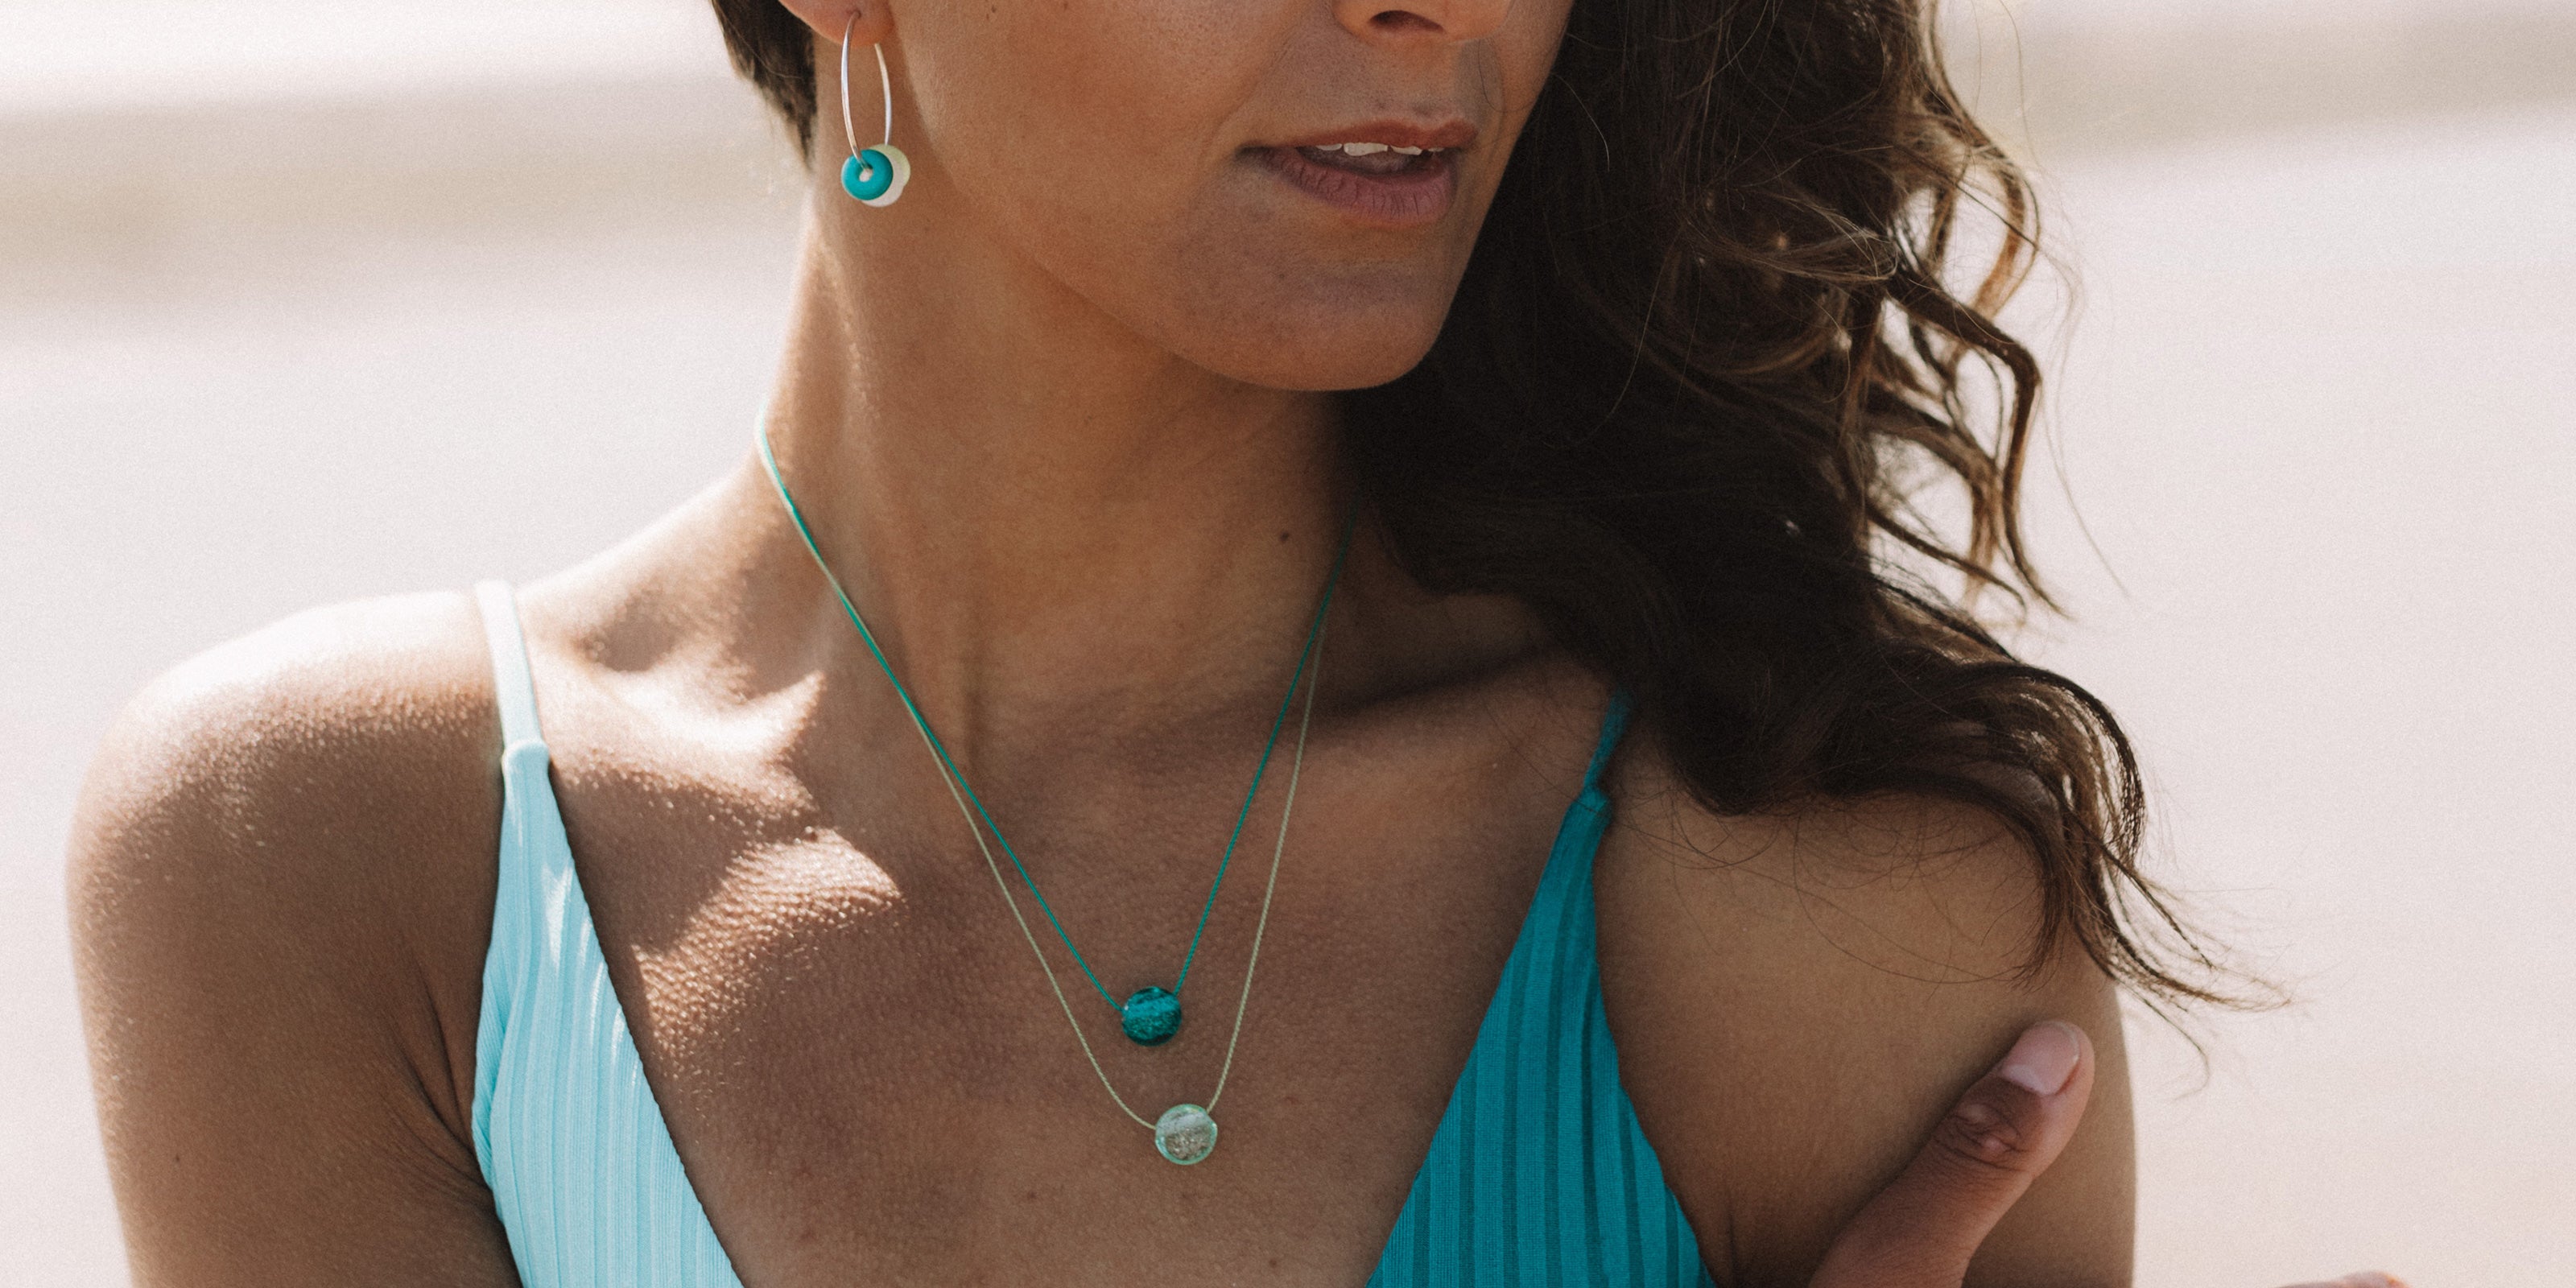 Dark haired girl on the beach wearing layered necklaces in teal and green fine cord.